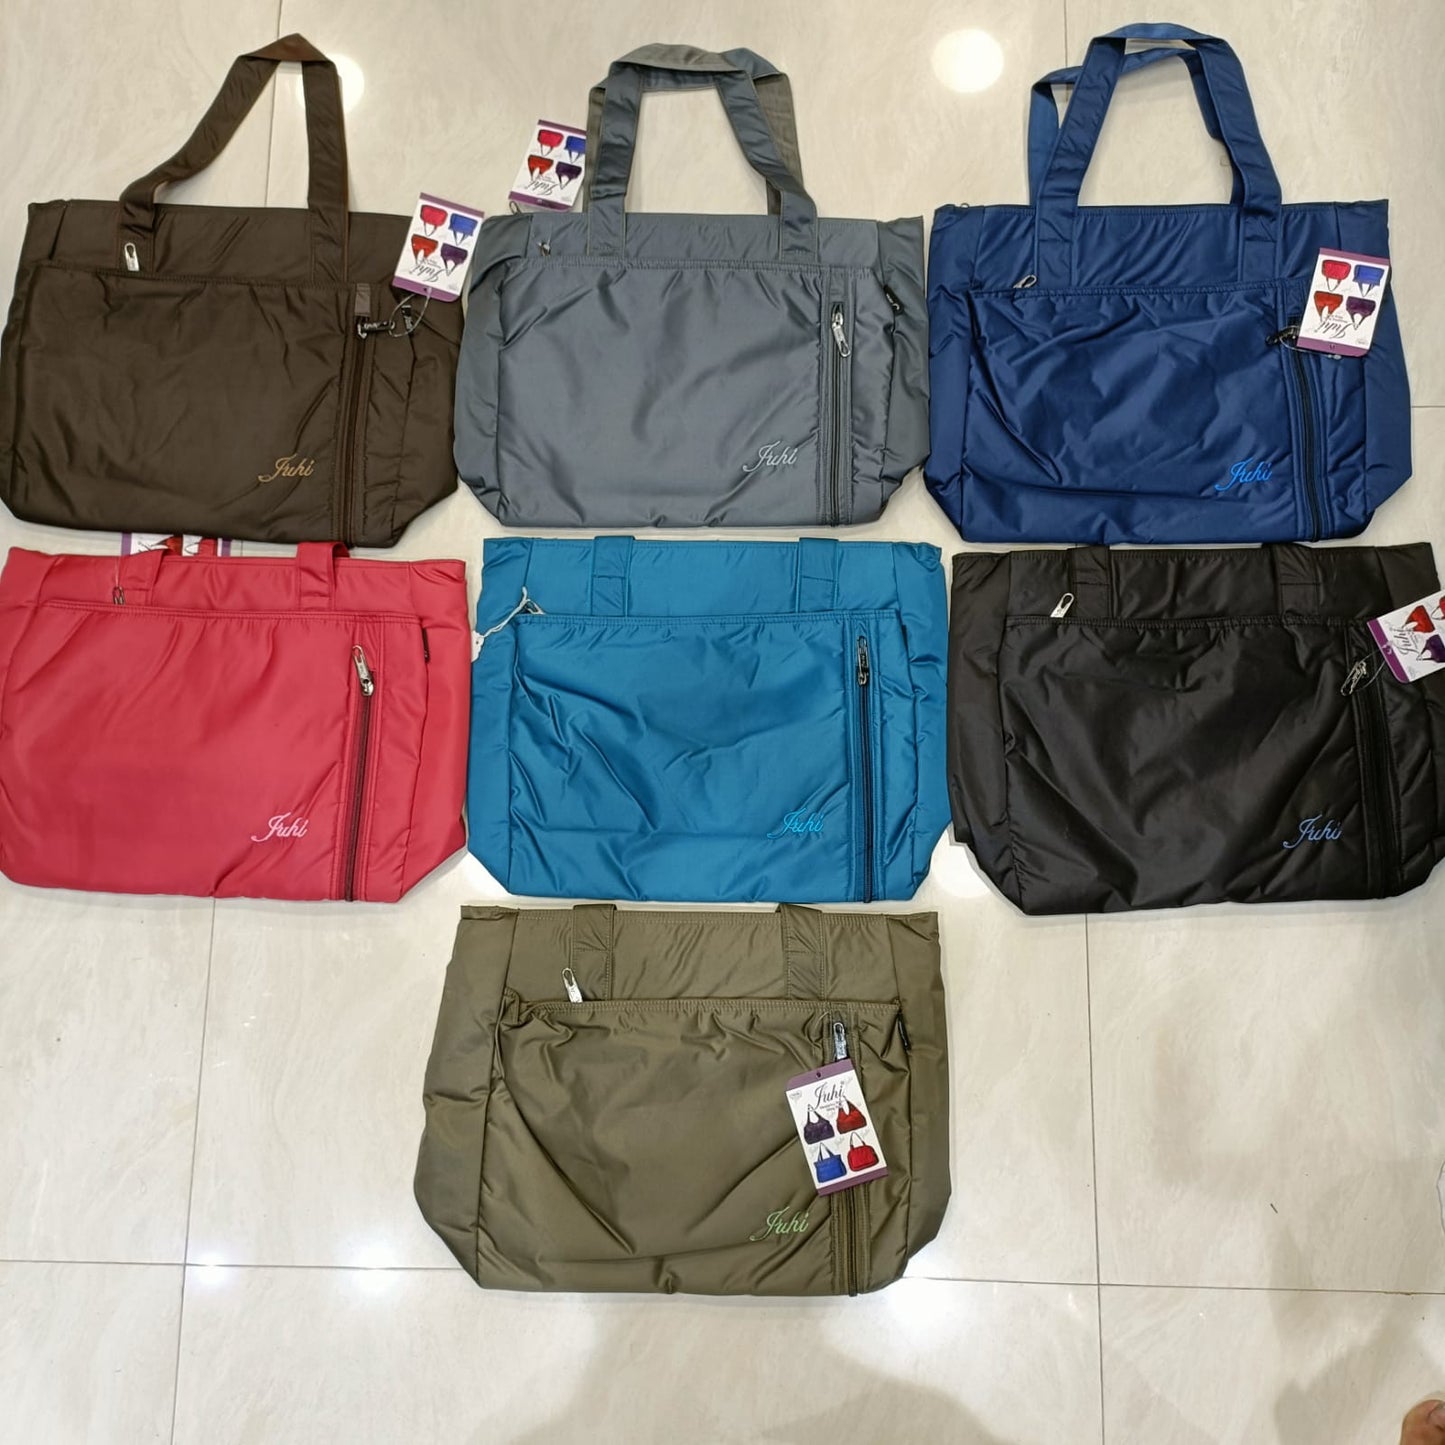 Abc's big size office use, travel use handbag with 6 pocket, best for carrying big size register